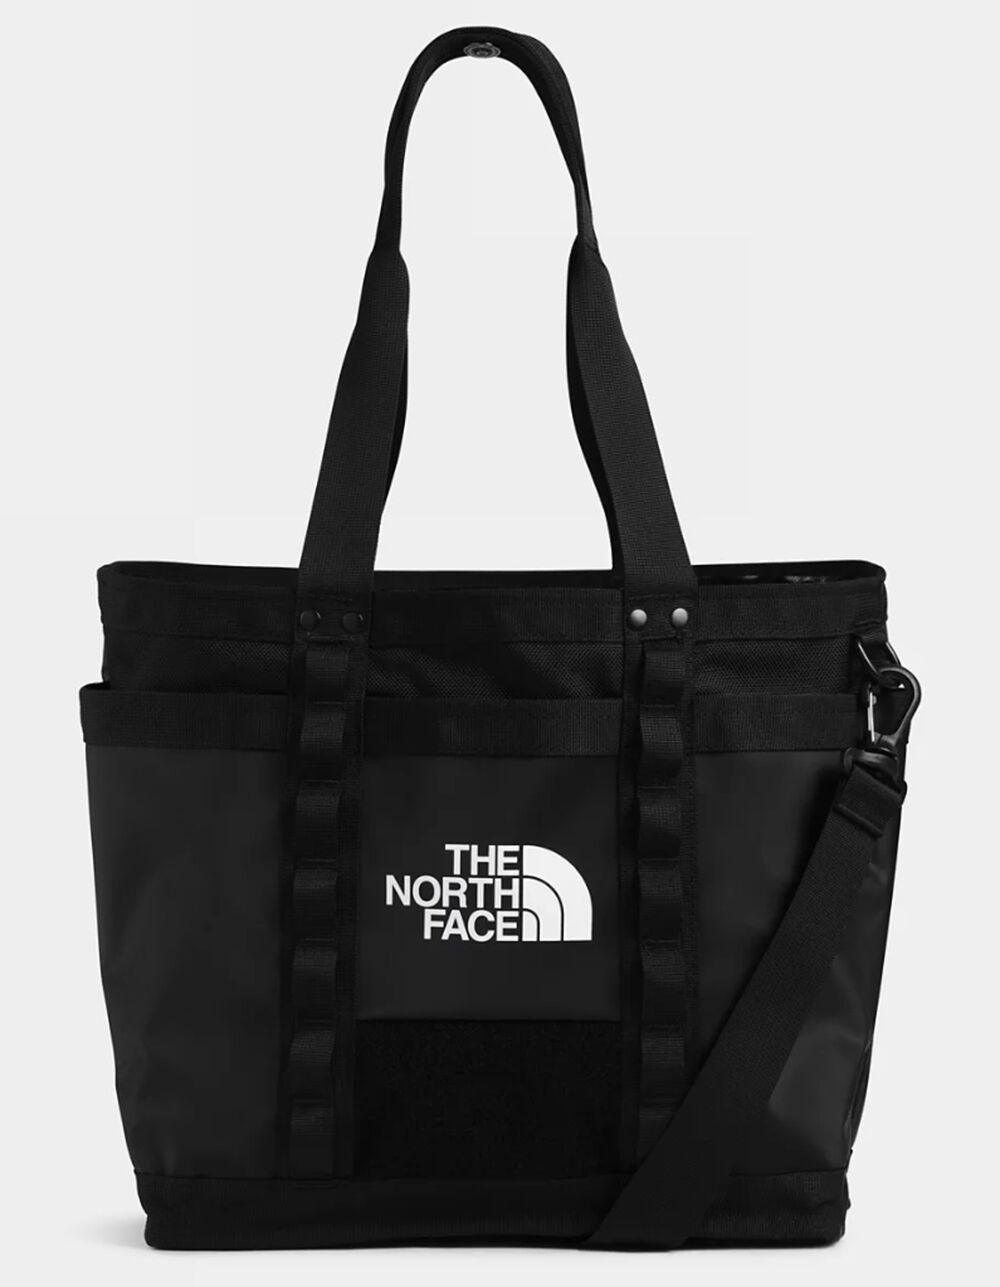 THE NORTH FACE Explore Utility Tote Bag - BLACK | Tillys